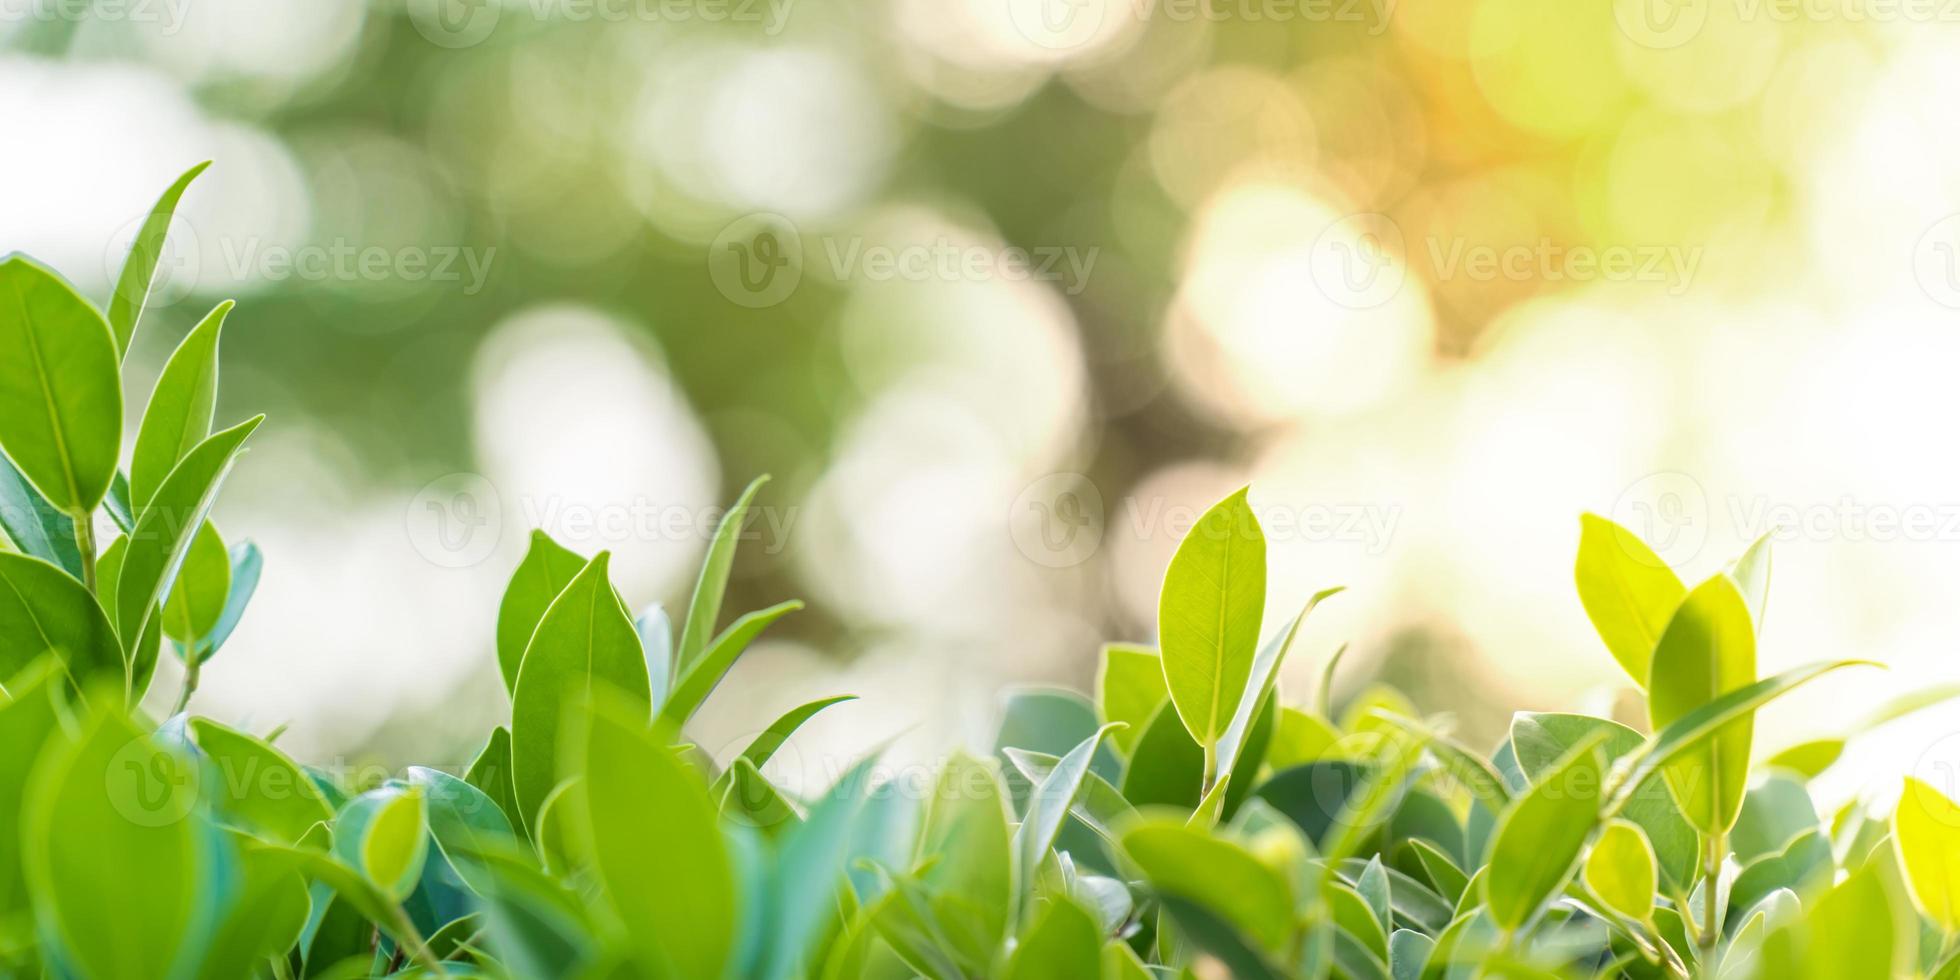 Closeup fresh green leaf in garden under sunlight with bokeh backgrounds, Natural green leaves plants, Concept for backgrounds and ecology backdrop or greenery wallpaper, Copy space for your text. photo